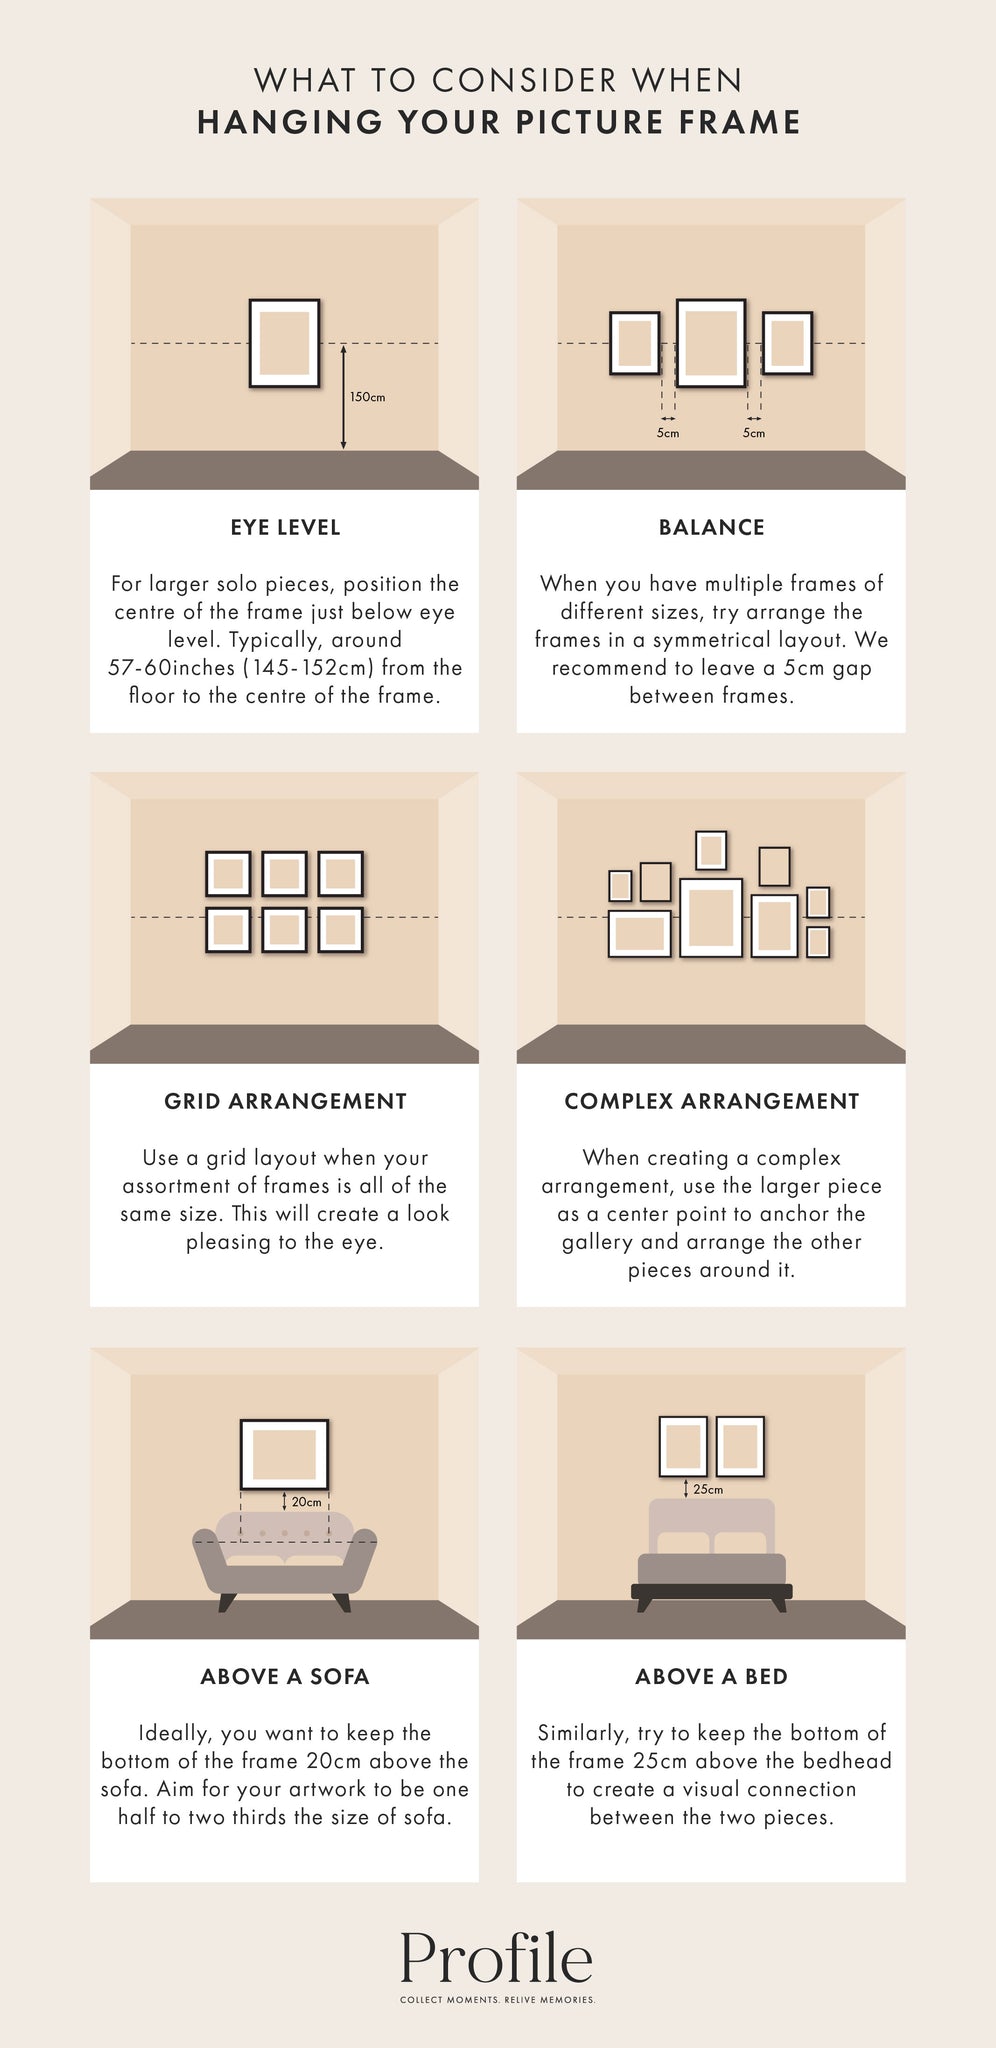 Best place to hang a picture frame infographic